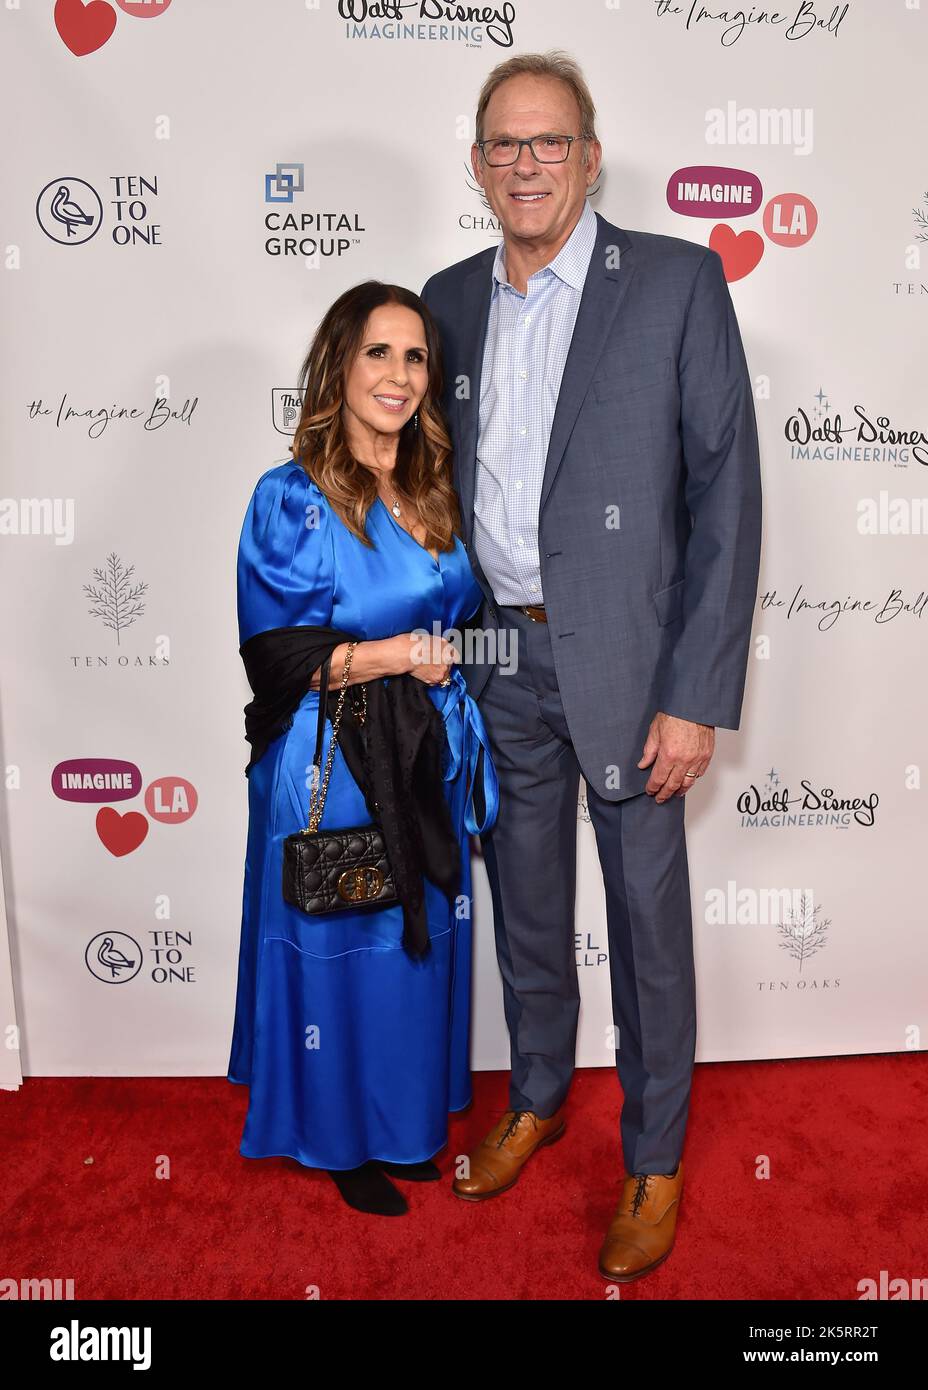 Los Angeles, USA. 09th Oct, 2022. Linda Rambis and Kurt Rambis walking the red carpet at The 7th Annual Imagine Ball presented by Imagine LA at The Peppermint Club in Los Angeles, CA on October 9, 2022. (Photo By Scott Kirkland/Sipa USA) Credit: Sipa USA/Alamy Live News Stock Photo